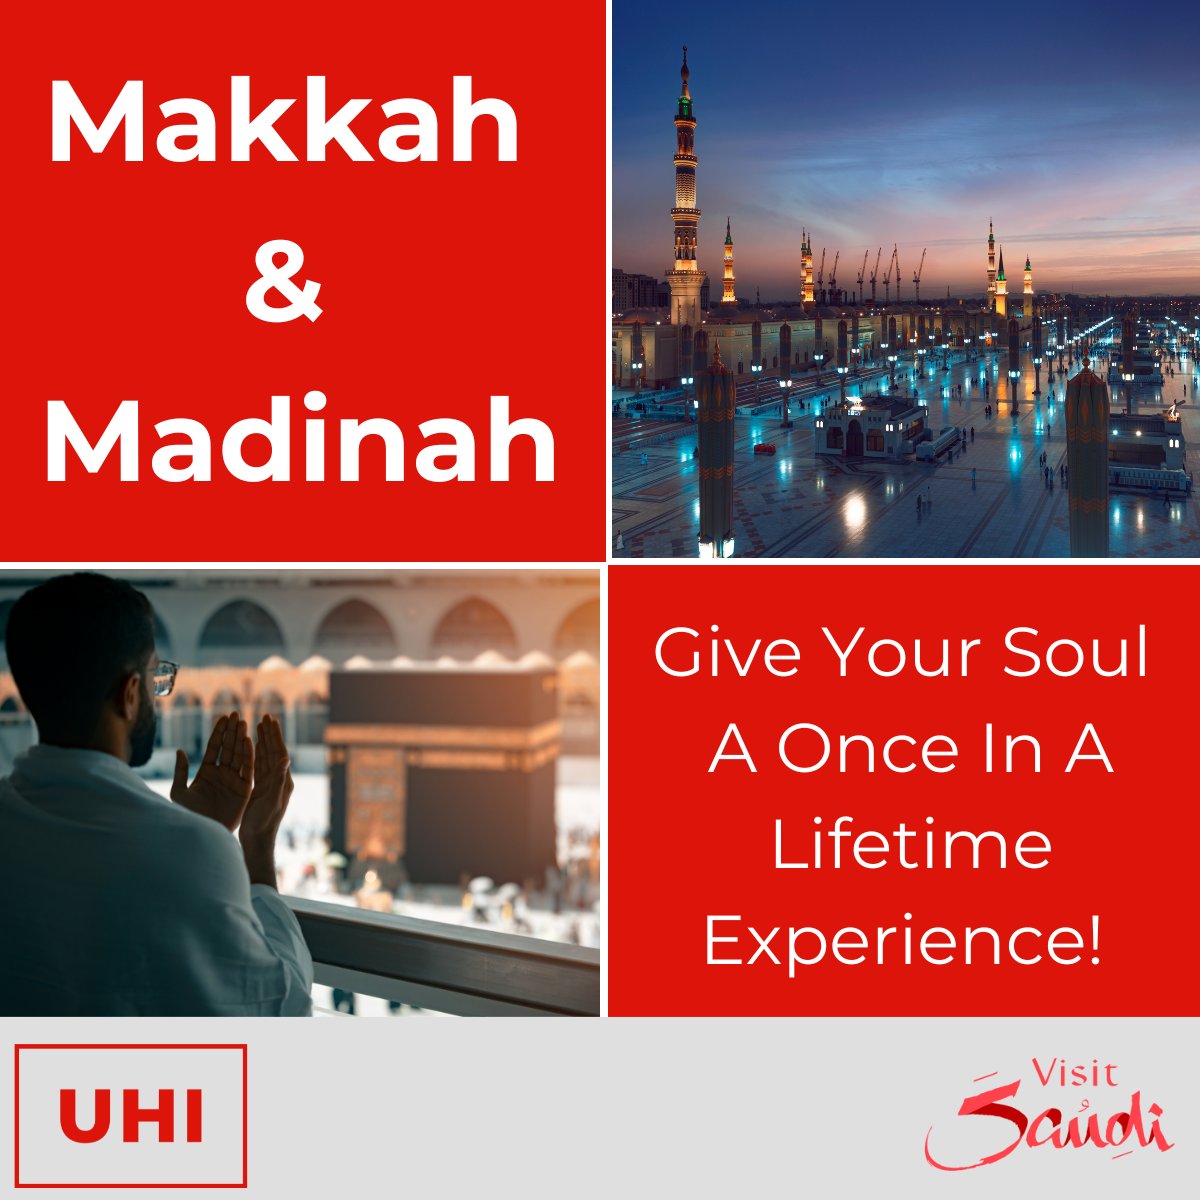 Explore two of the most sacred cities on the planet!

Discover all the information you need to book your spiritual journey in Makkah and Madinah.

Read more: tinyurl.com/yc3f4pfw
Book now: uhitravel.com
Explore saudi: GatewayToSaudi.com

#UHI #WebBeds